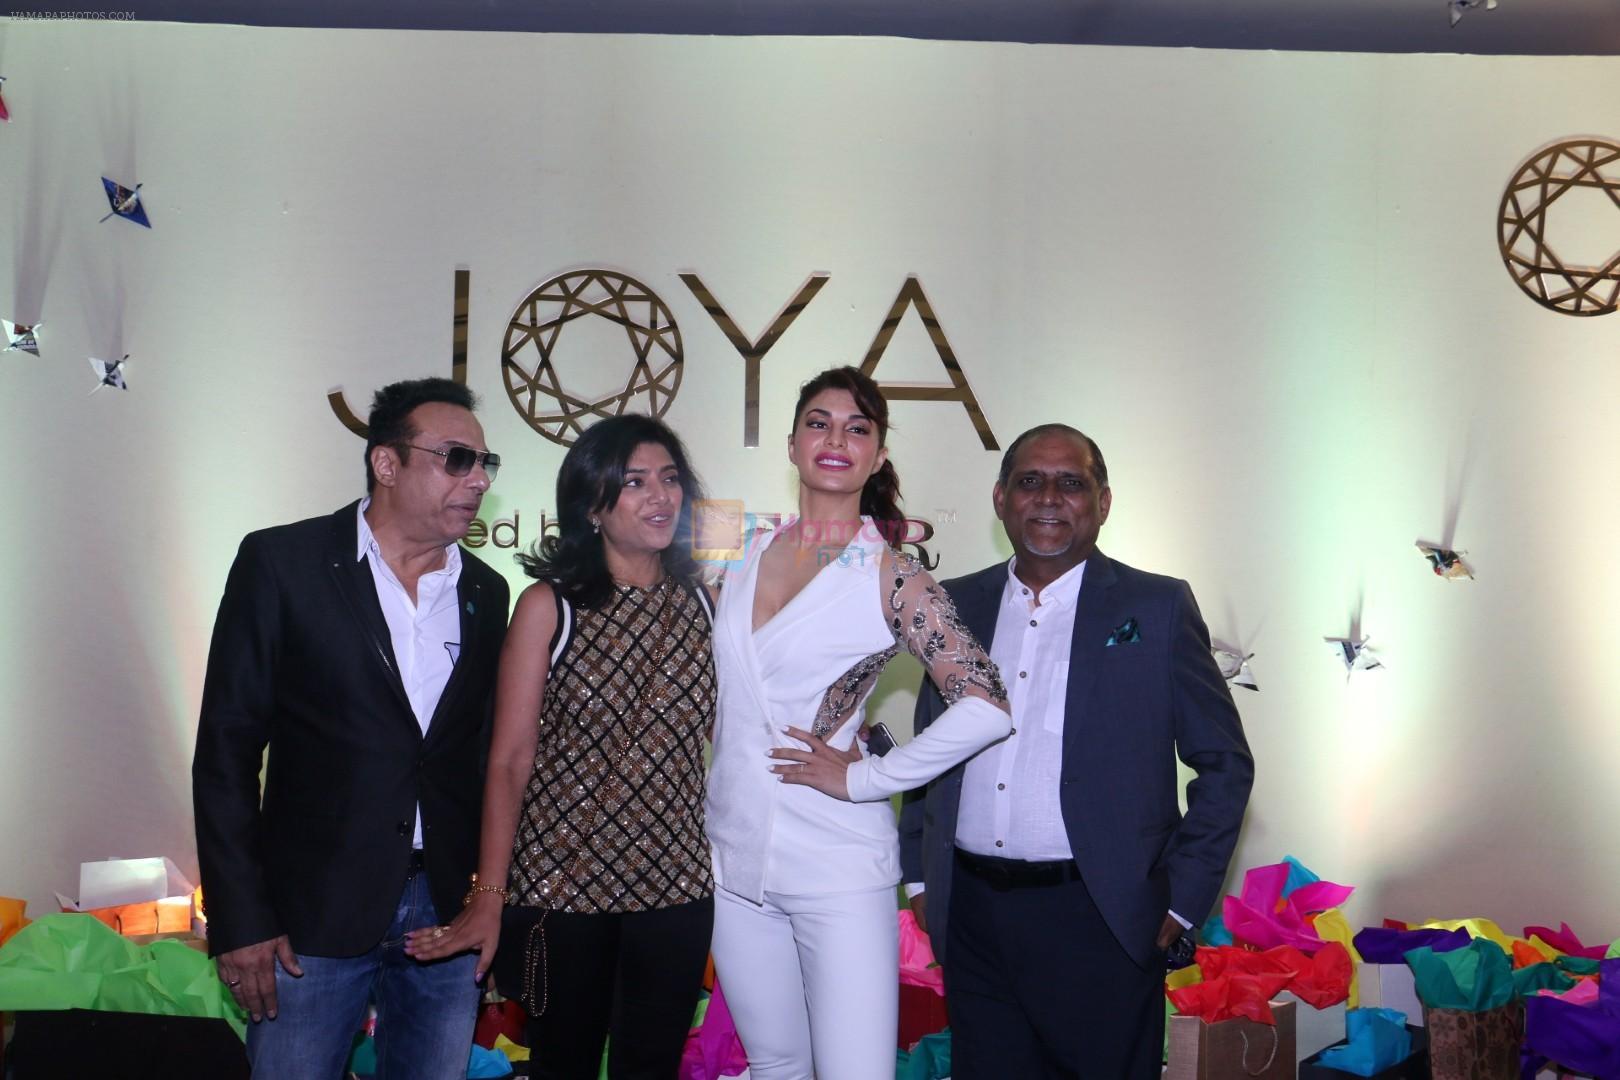 Jacqueline Fernandez at the Inauguration Of Shopping Exhibition on 22nd Sept 2017